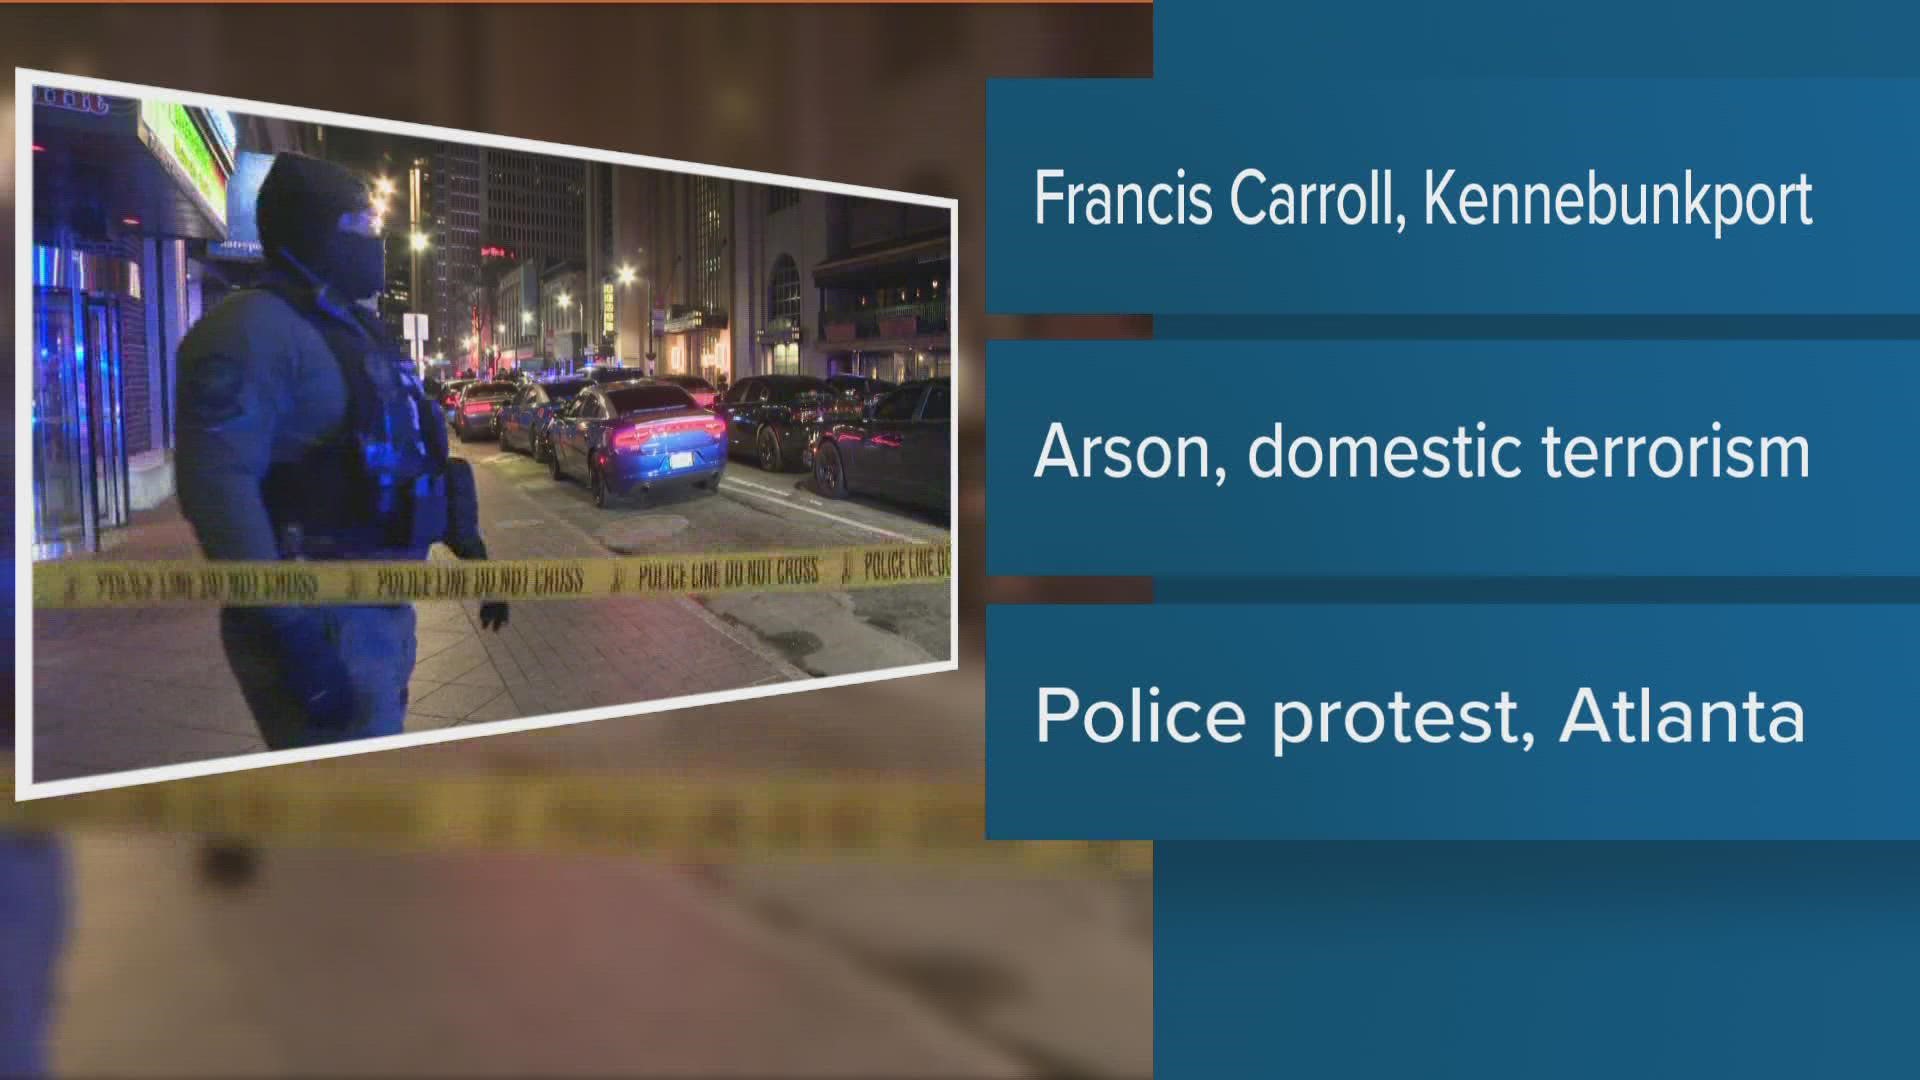 Francis Carroll of Kennebunkport faces those charges and other felonies and misdemeanors after a protest in Atlanta became violent Saturday night.